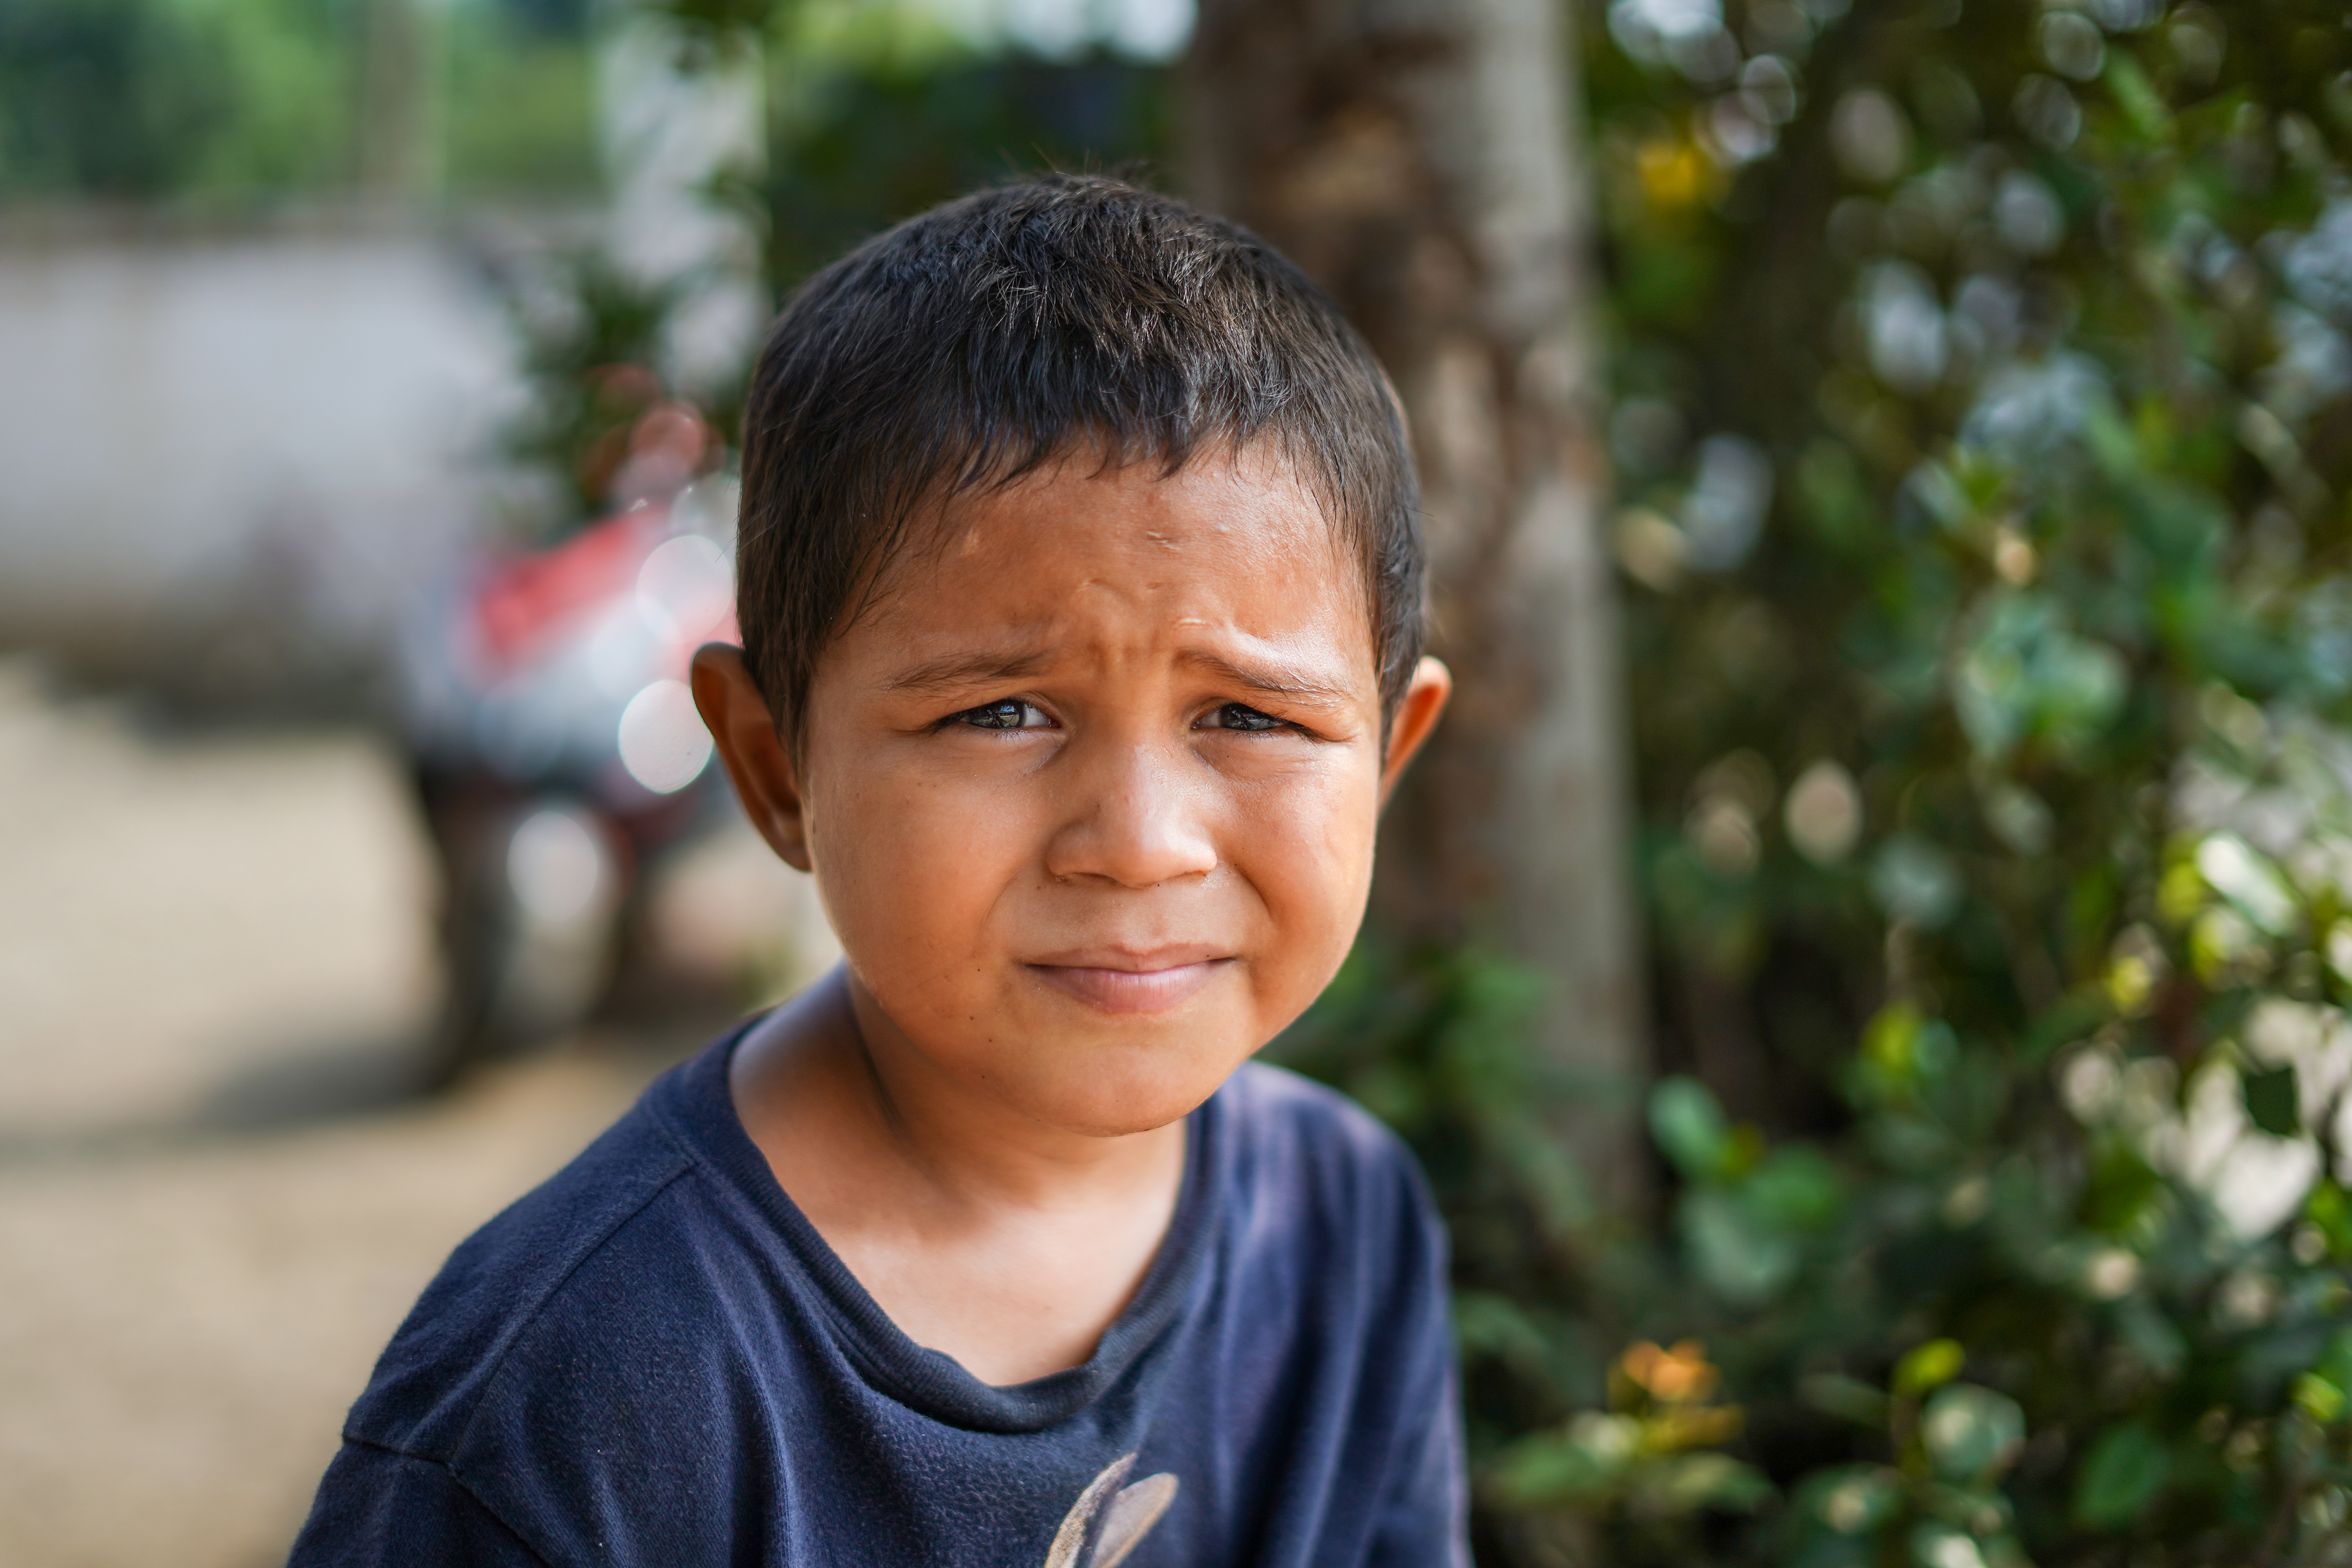 A young boy from Honduras, standing outside.